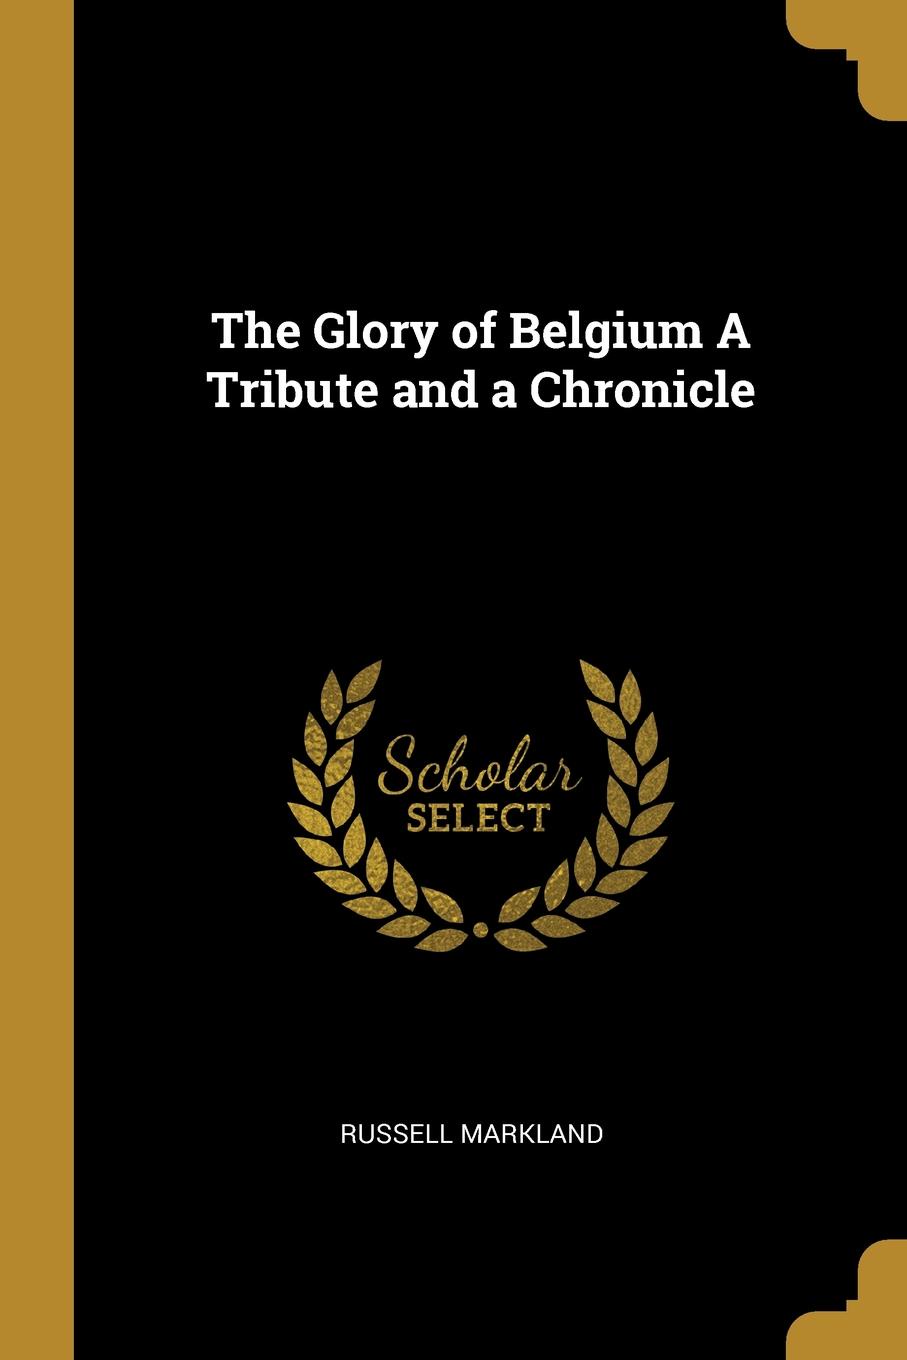 The Glory of Belgium A Tribute and a Chronicle